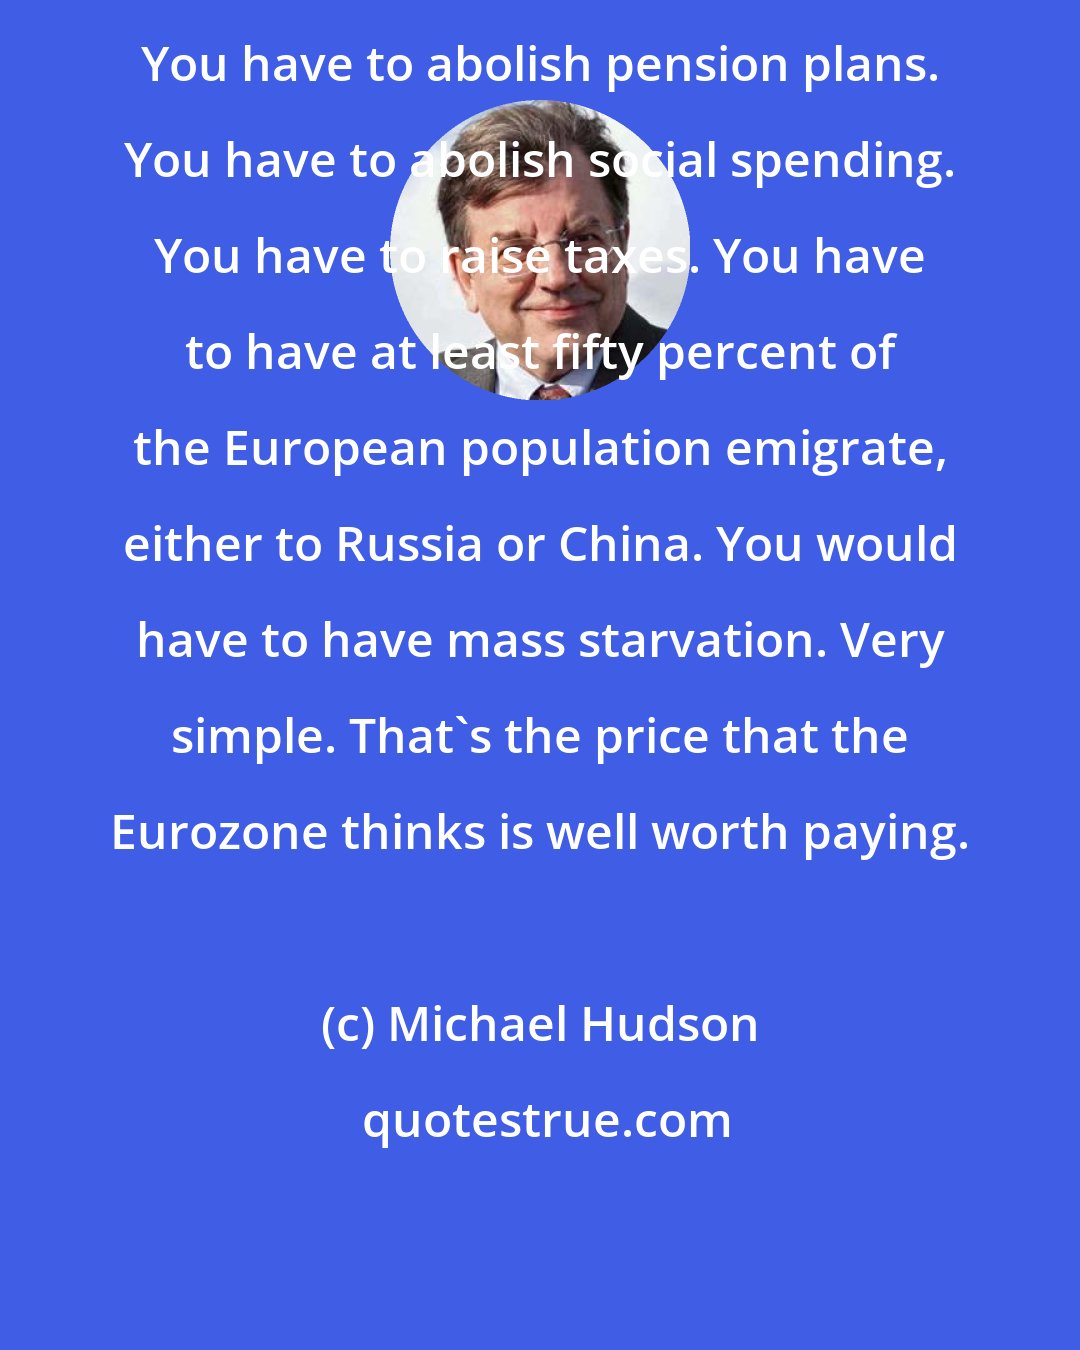 Michael Hudson: You have to abolish pension plans. You have to abolish social spending. You have to raise taxes. You have to have at least fifty percent of the European population emigrate, either to Russia or China. You would have to have mass starvation. Very simple. That's the price that the Eurozone thinks is well worth paying.